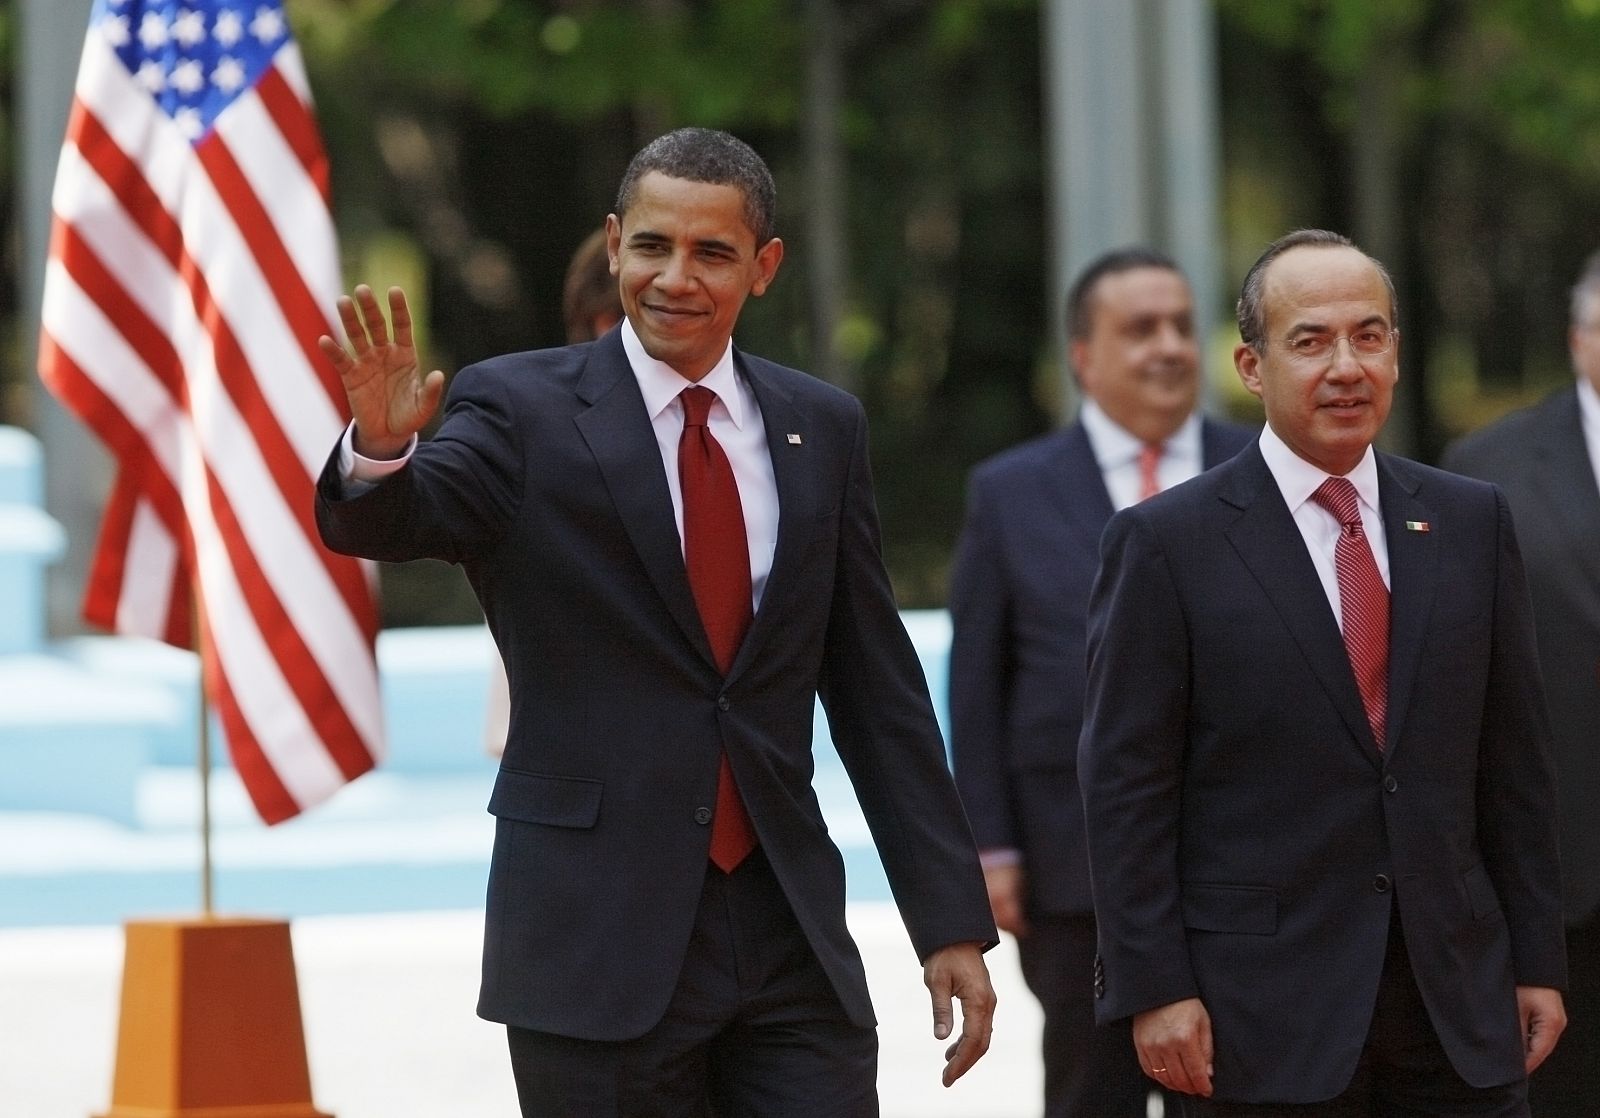 U.S. President Obama waves as he walks with Mexico's President Calderon in Mexico City